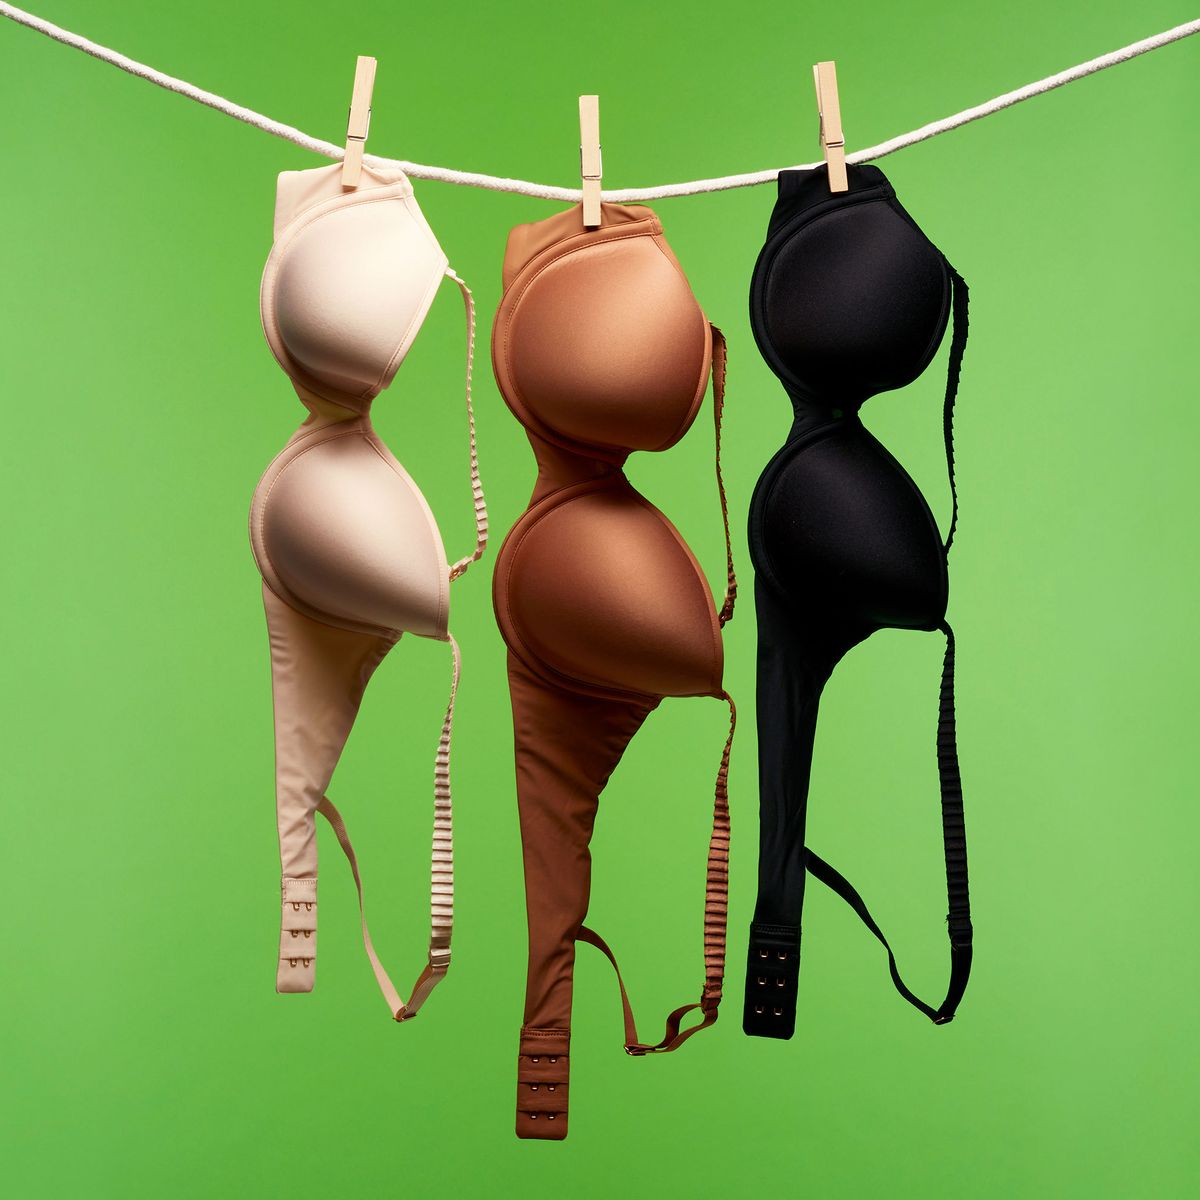 Black Petite Small Tits - The Best Bras for Small Breasts 2022 | The Strategist